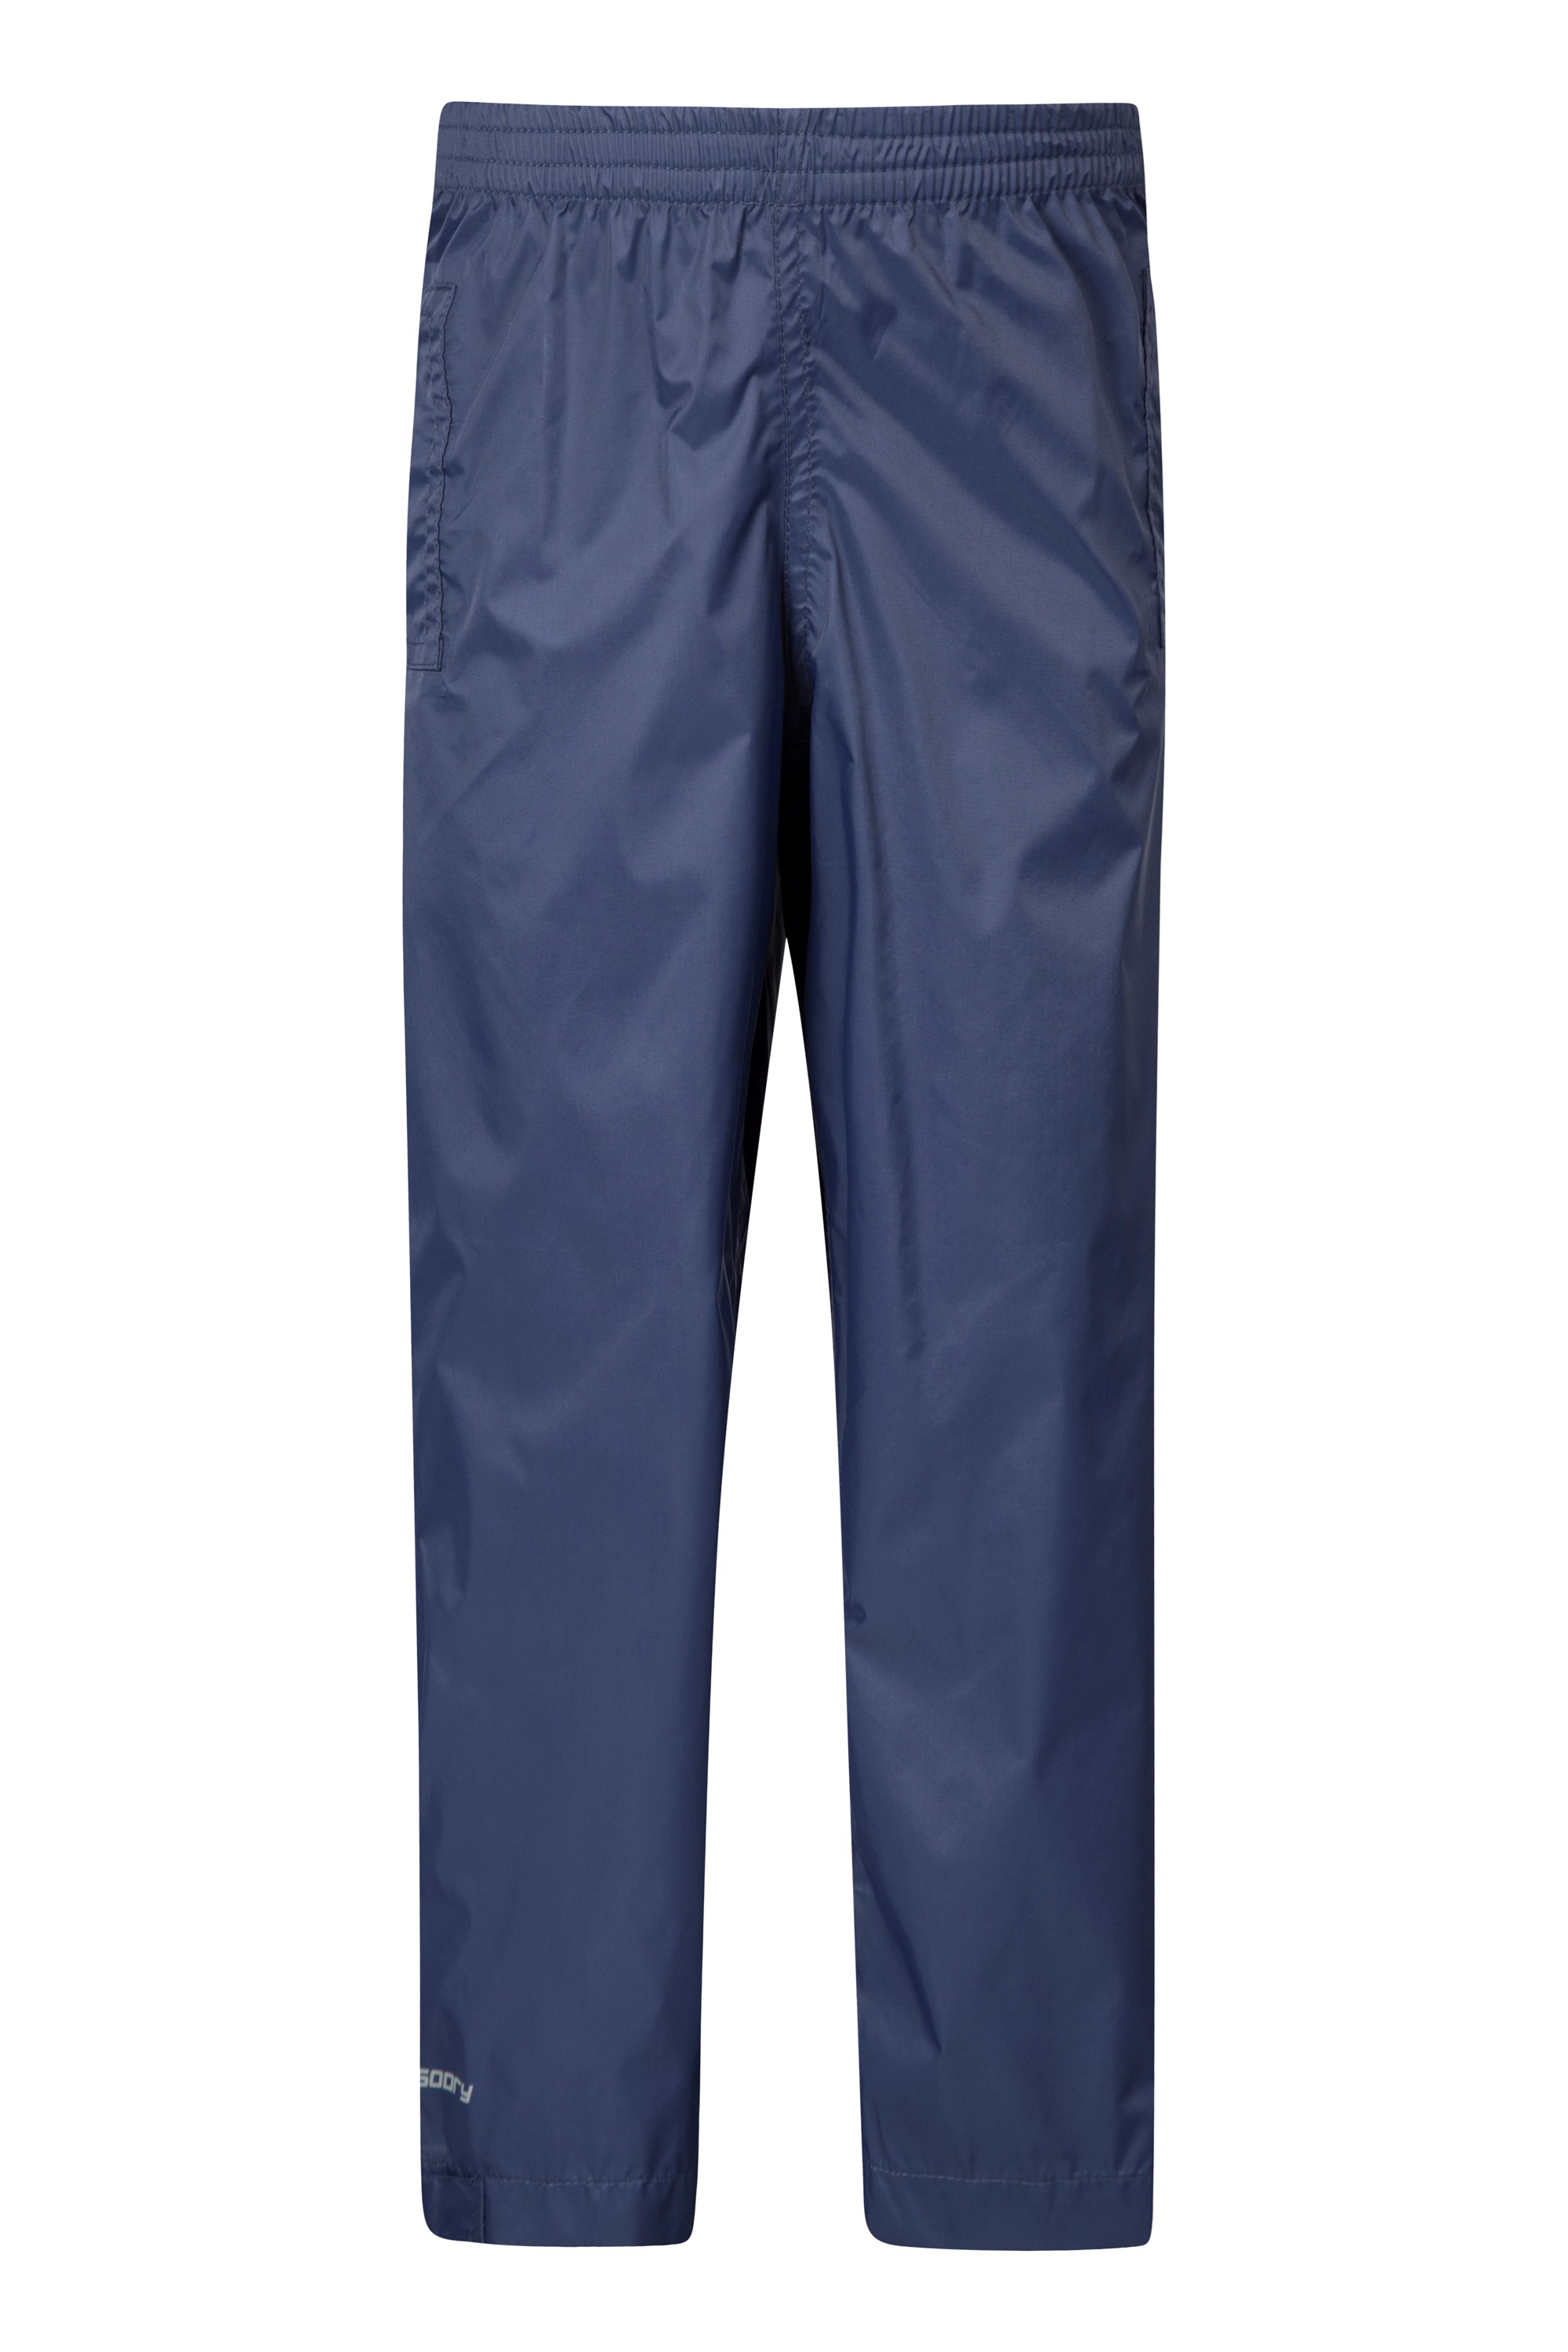 Boys and Girls Outdoors Pants / Trousers - Australia